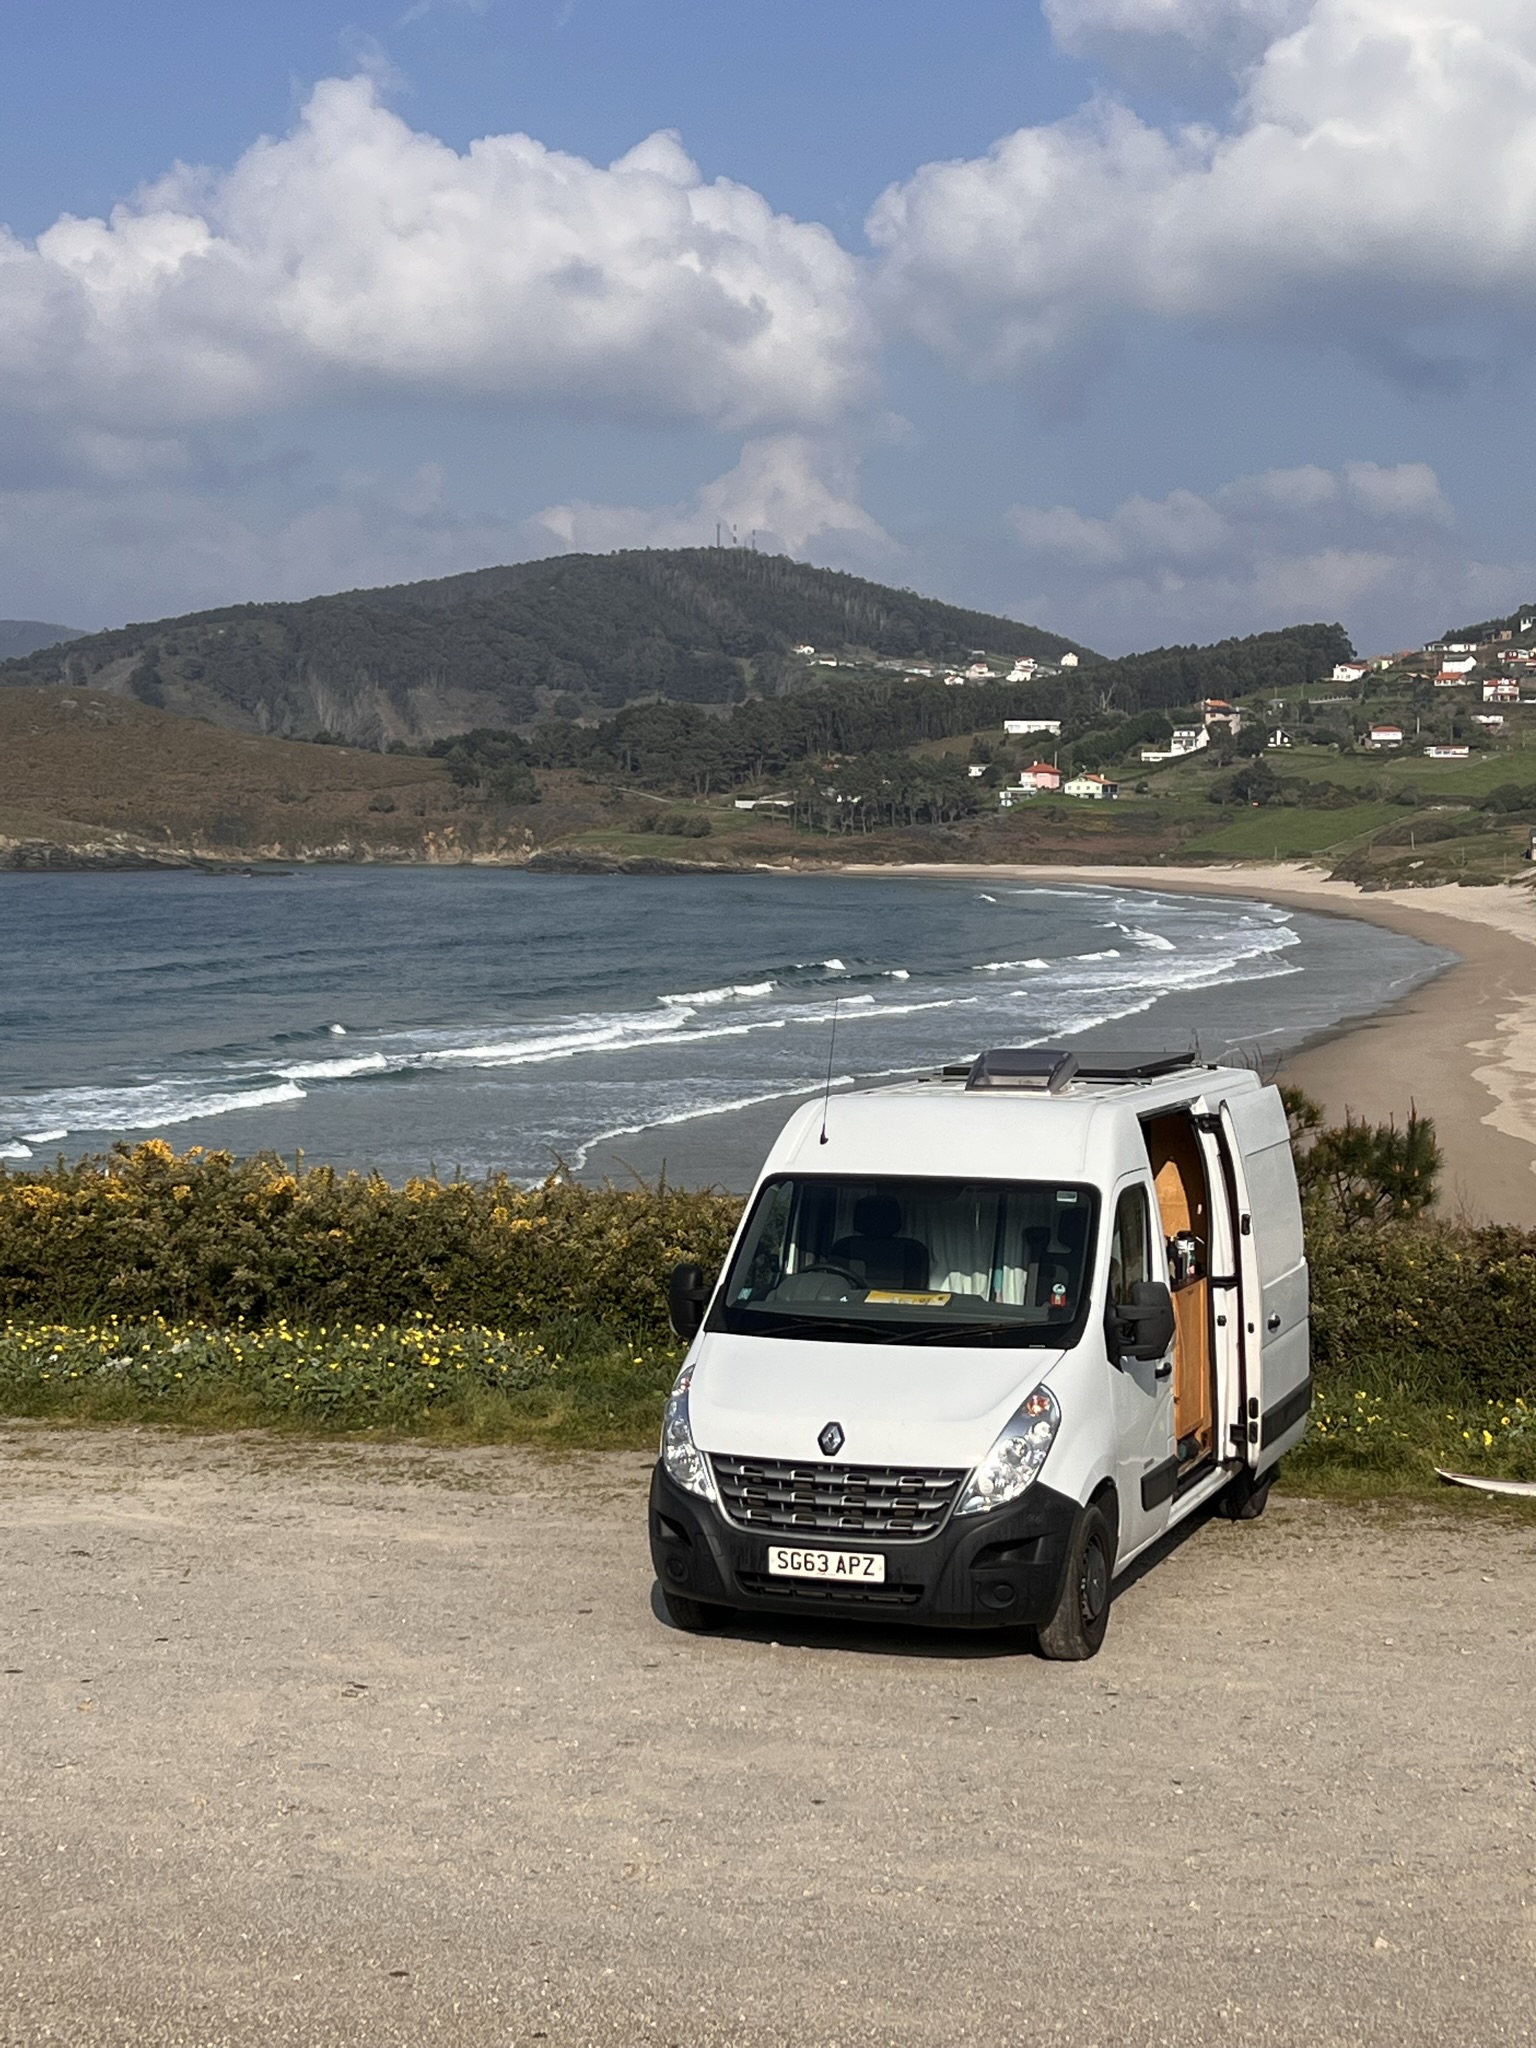 A white camper van with an open sliding door is parked on a grassy area overlooking a curving sandy beach and the ocean. Waves crash gently on the shore. In the background, green hills and scattered houses dot the landscape under a partly cloudy sky.